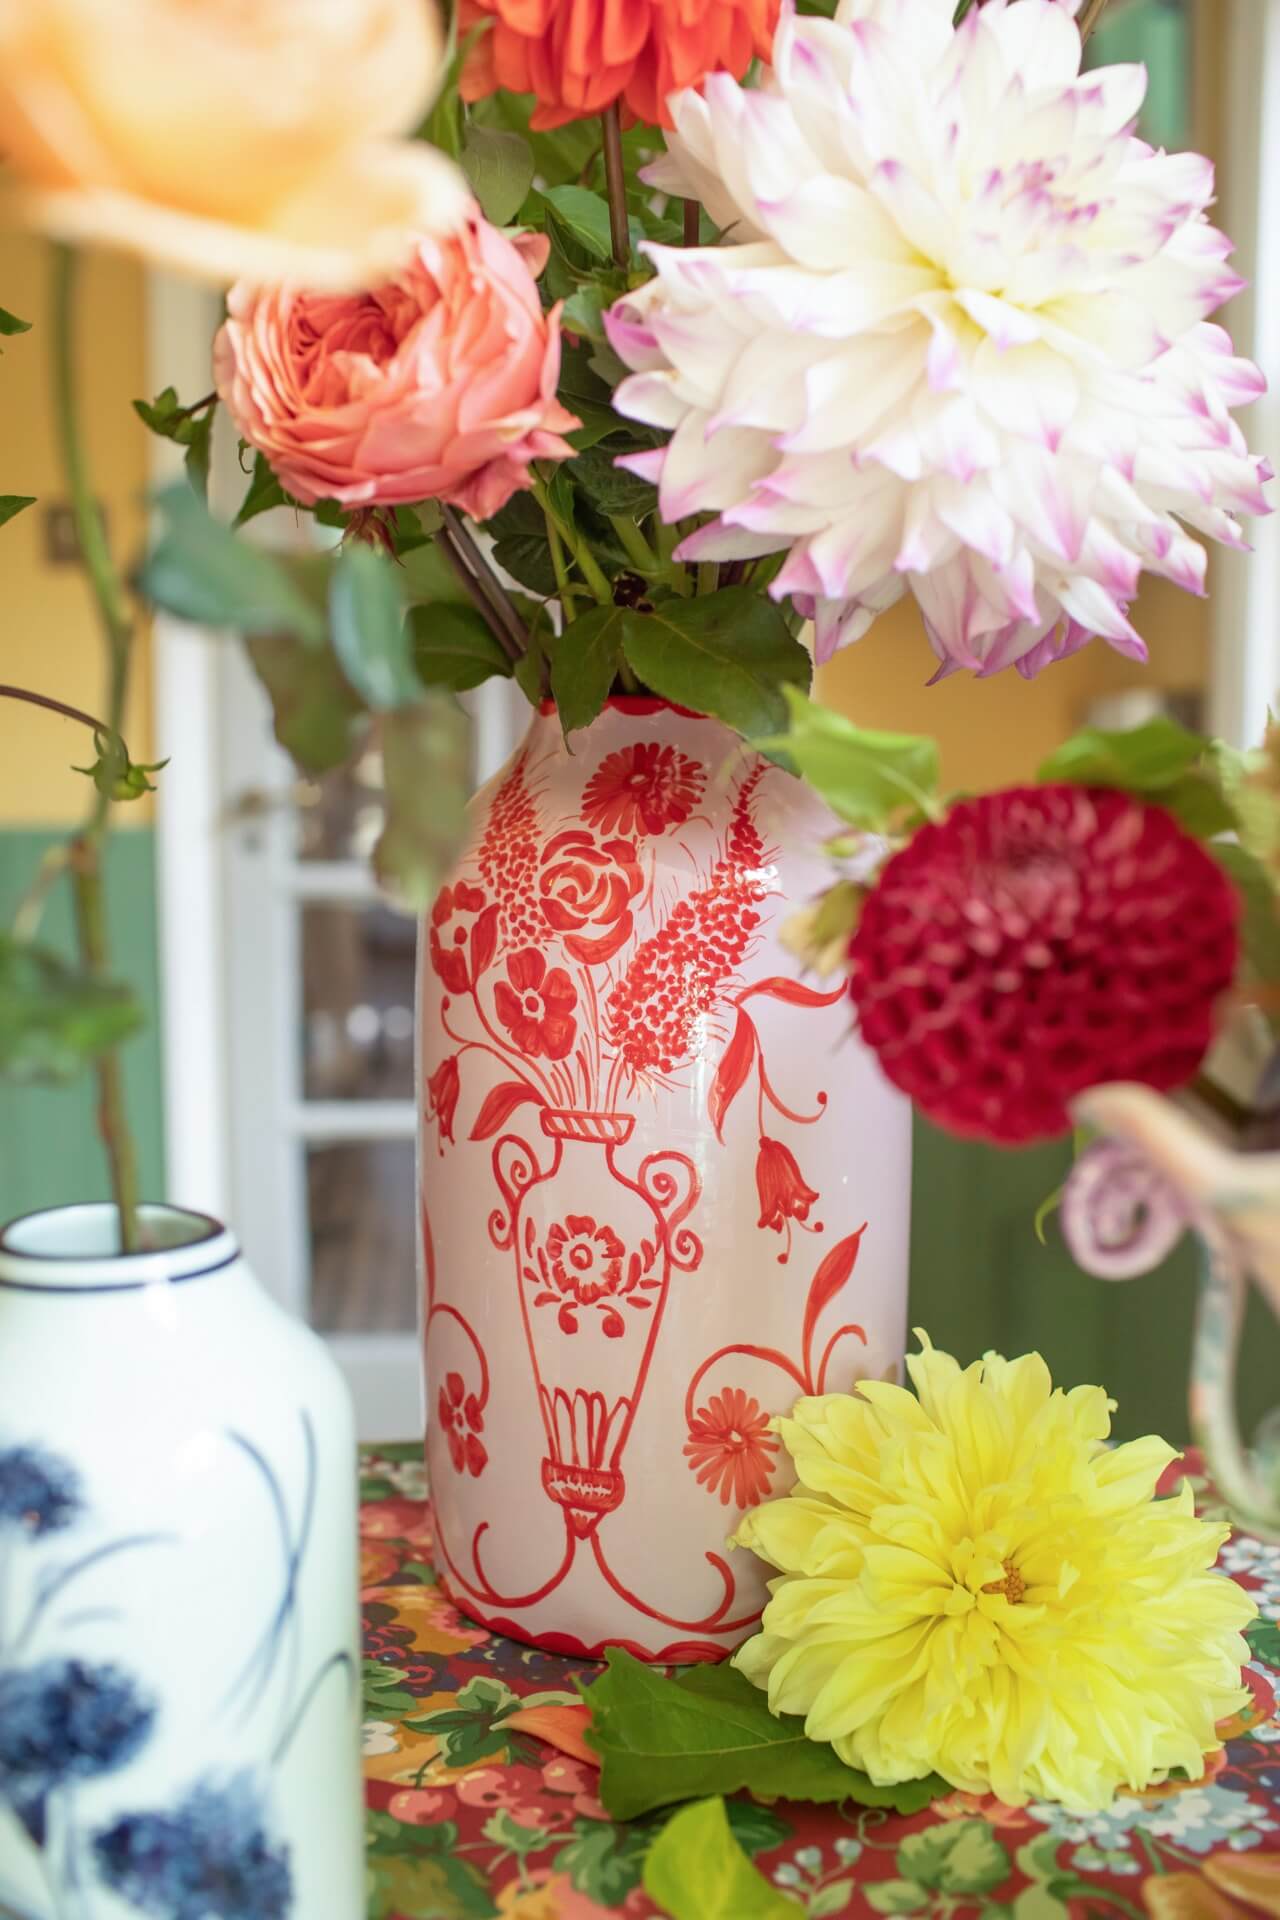 Colourful vintage antique style vases from independent UK contemporary homeware brand Vaisselle